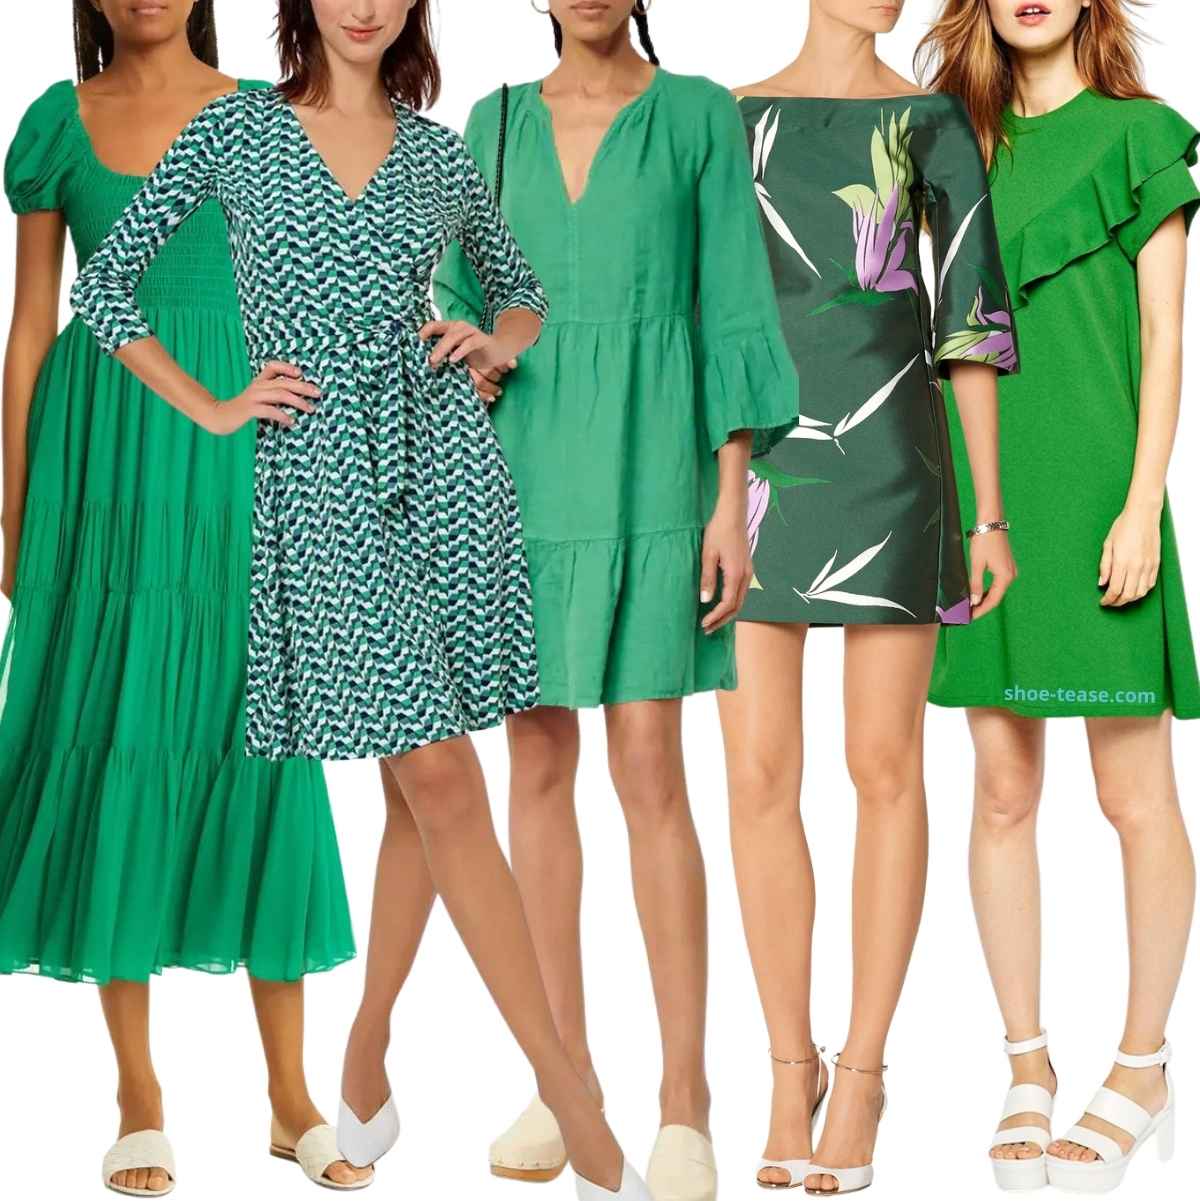 Go Green! 10 Best Color Shoes to Wear with Green Dresses & Emerald Outfits